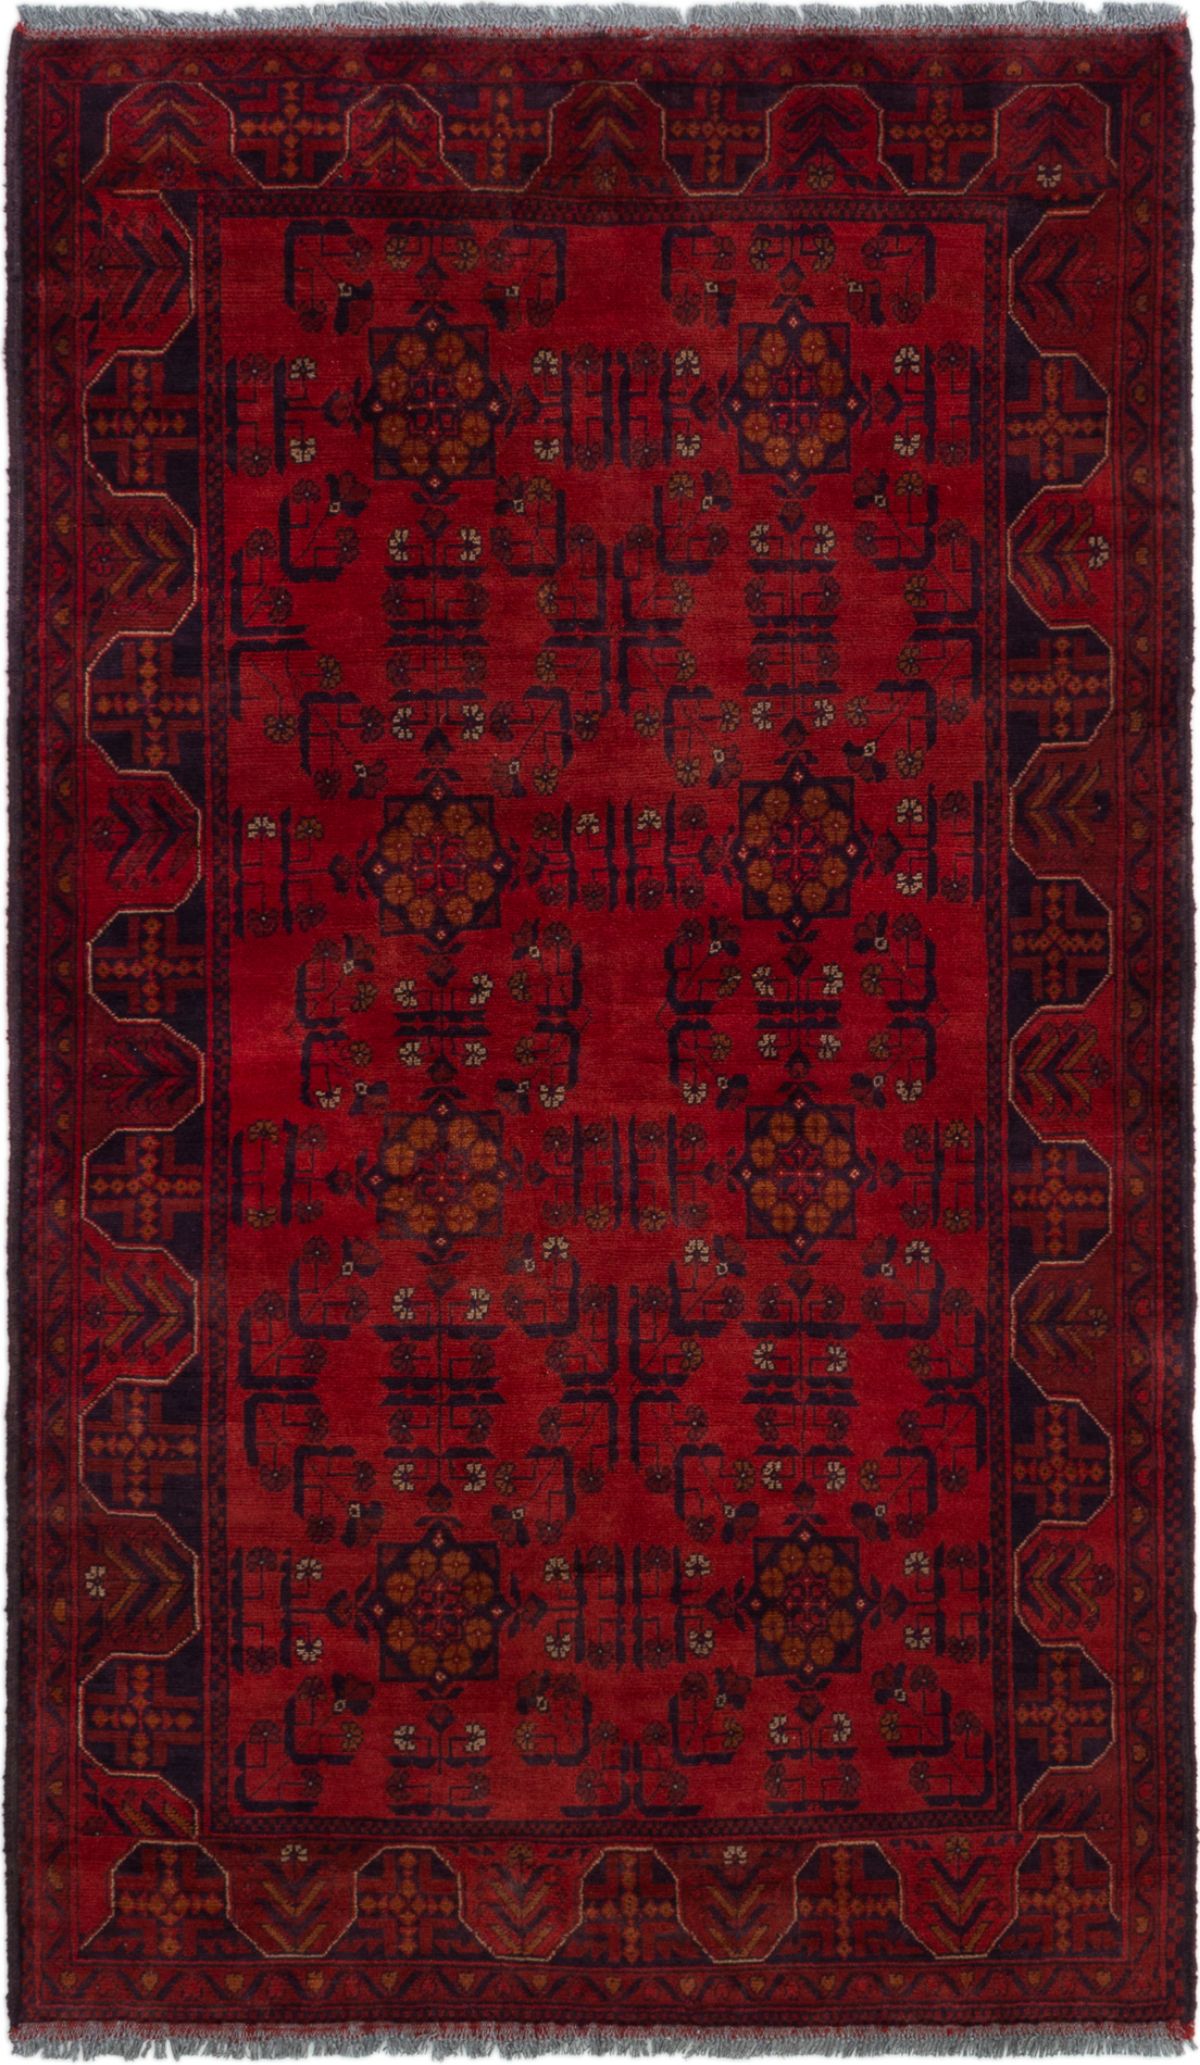 Hand-knotted Finest Khal Mohammadi Red Wool Rug 3'11" x 6'10"  Size: 3'11" x 6'10"  